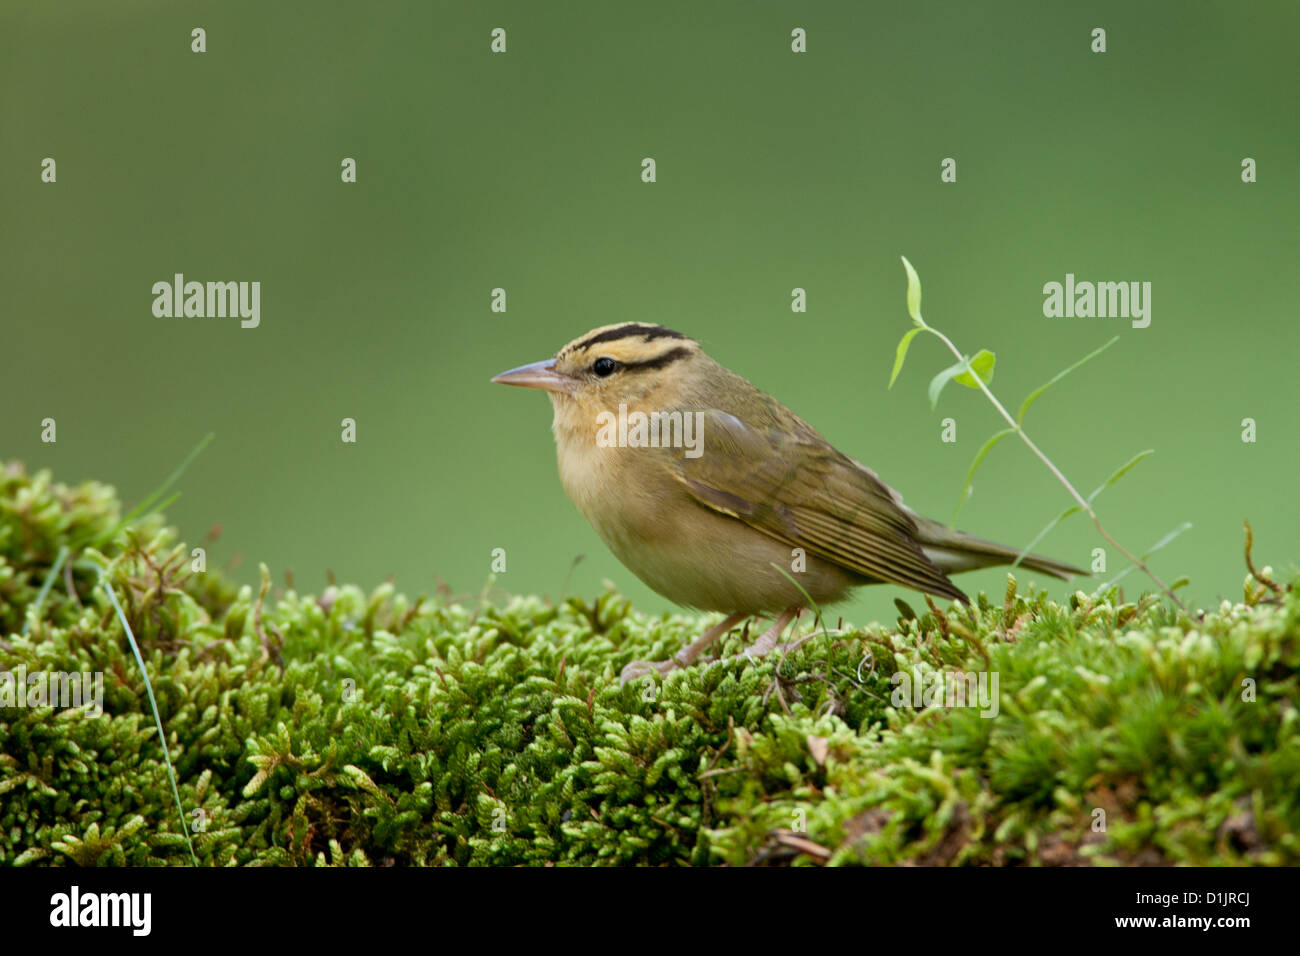 Verme-eating Warbler su muschio covered log uccelli songbird songbirds Ornitologia Scienza natura natura natura ambiente Warblers Foto Stock